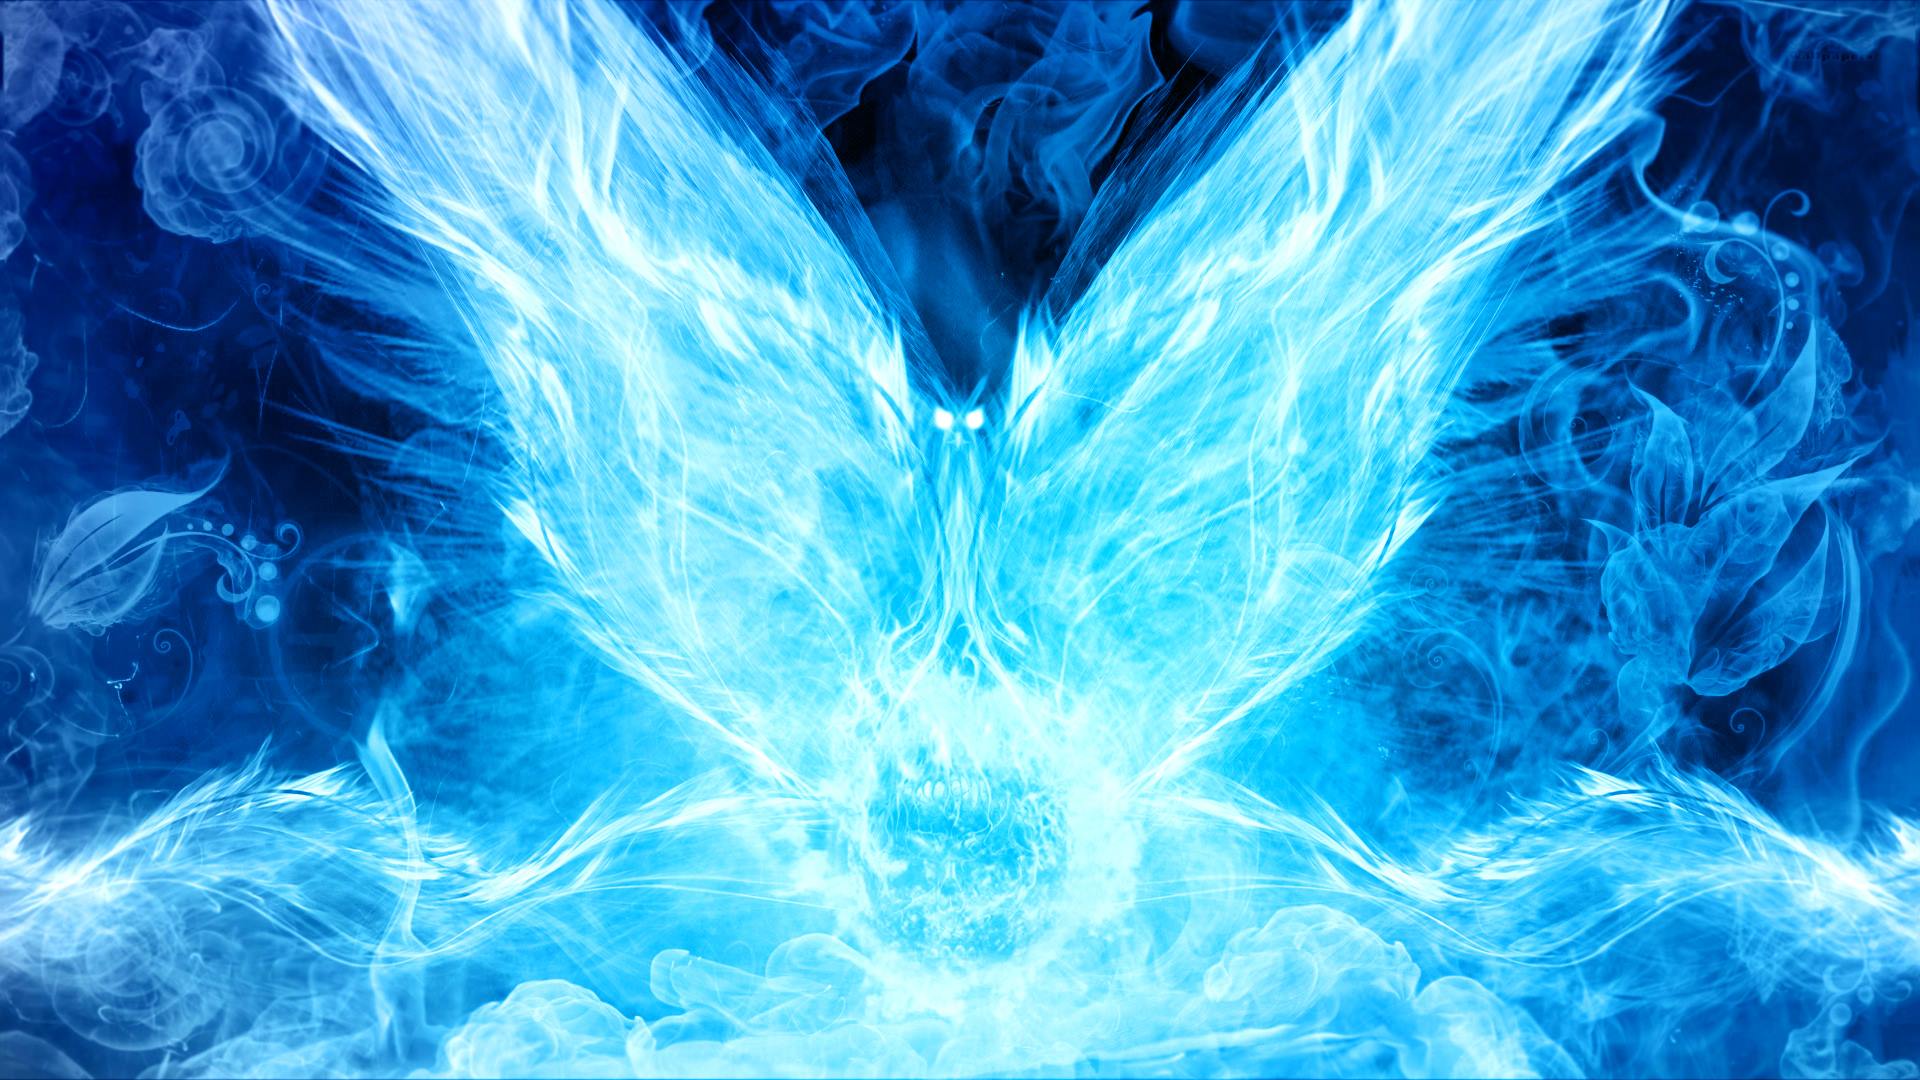 The bird of flames Blue by Justass on